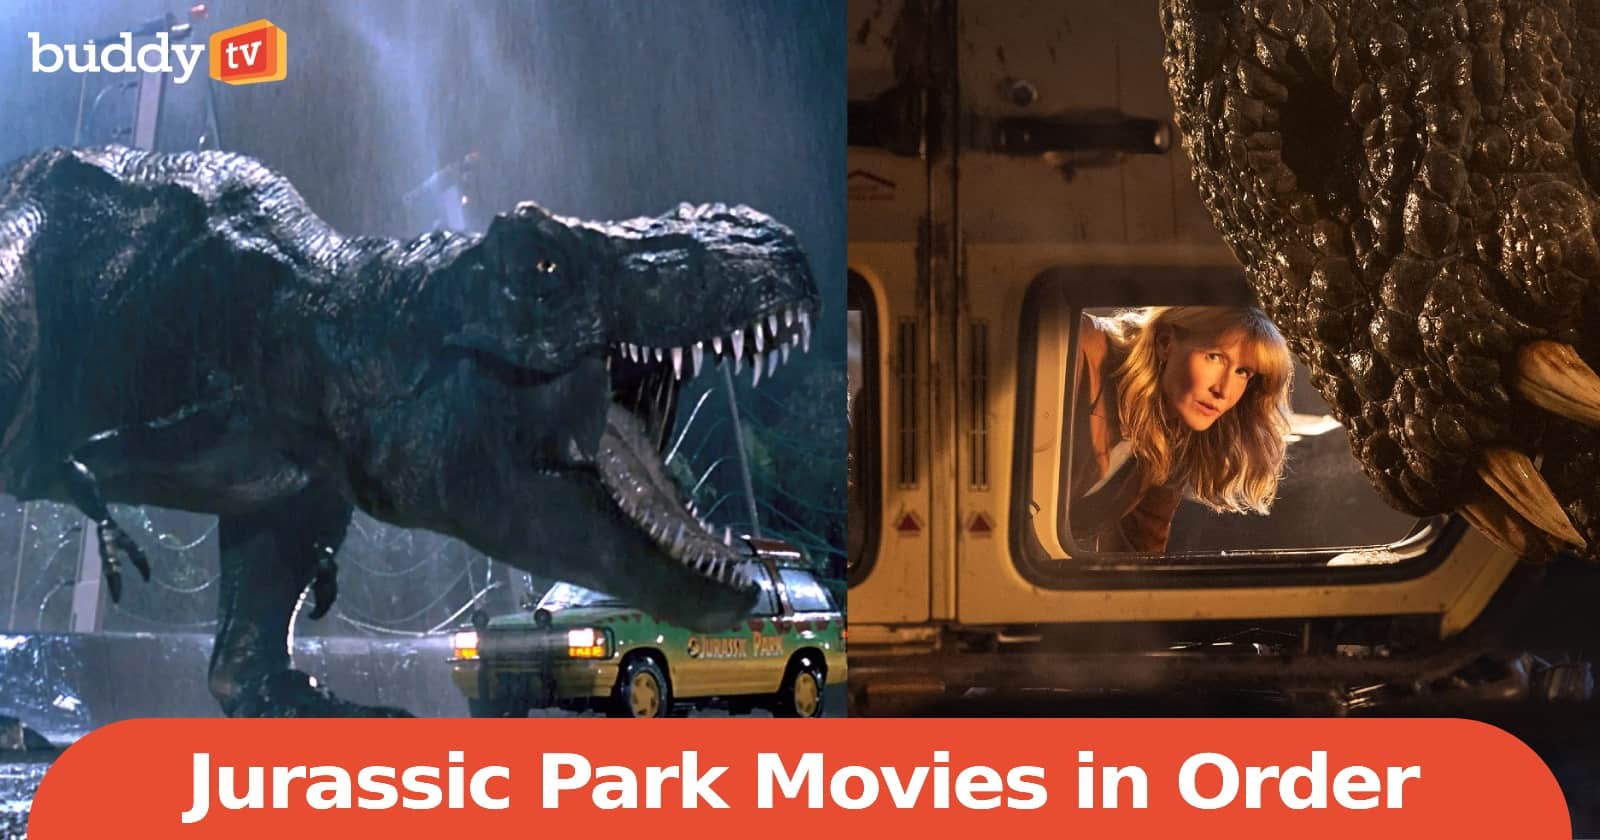 Jurassic Park Movies in Order: How to Watch the Film Series